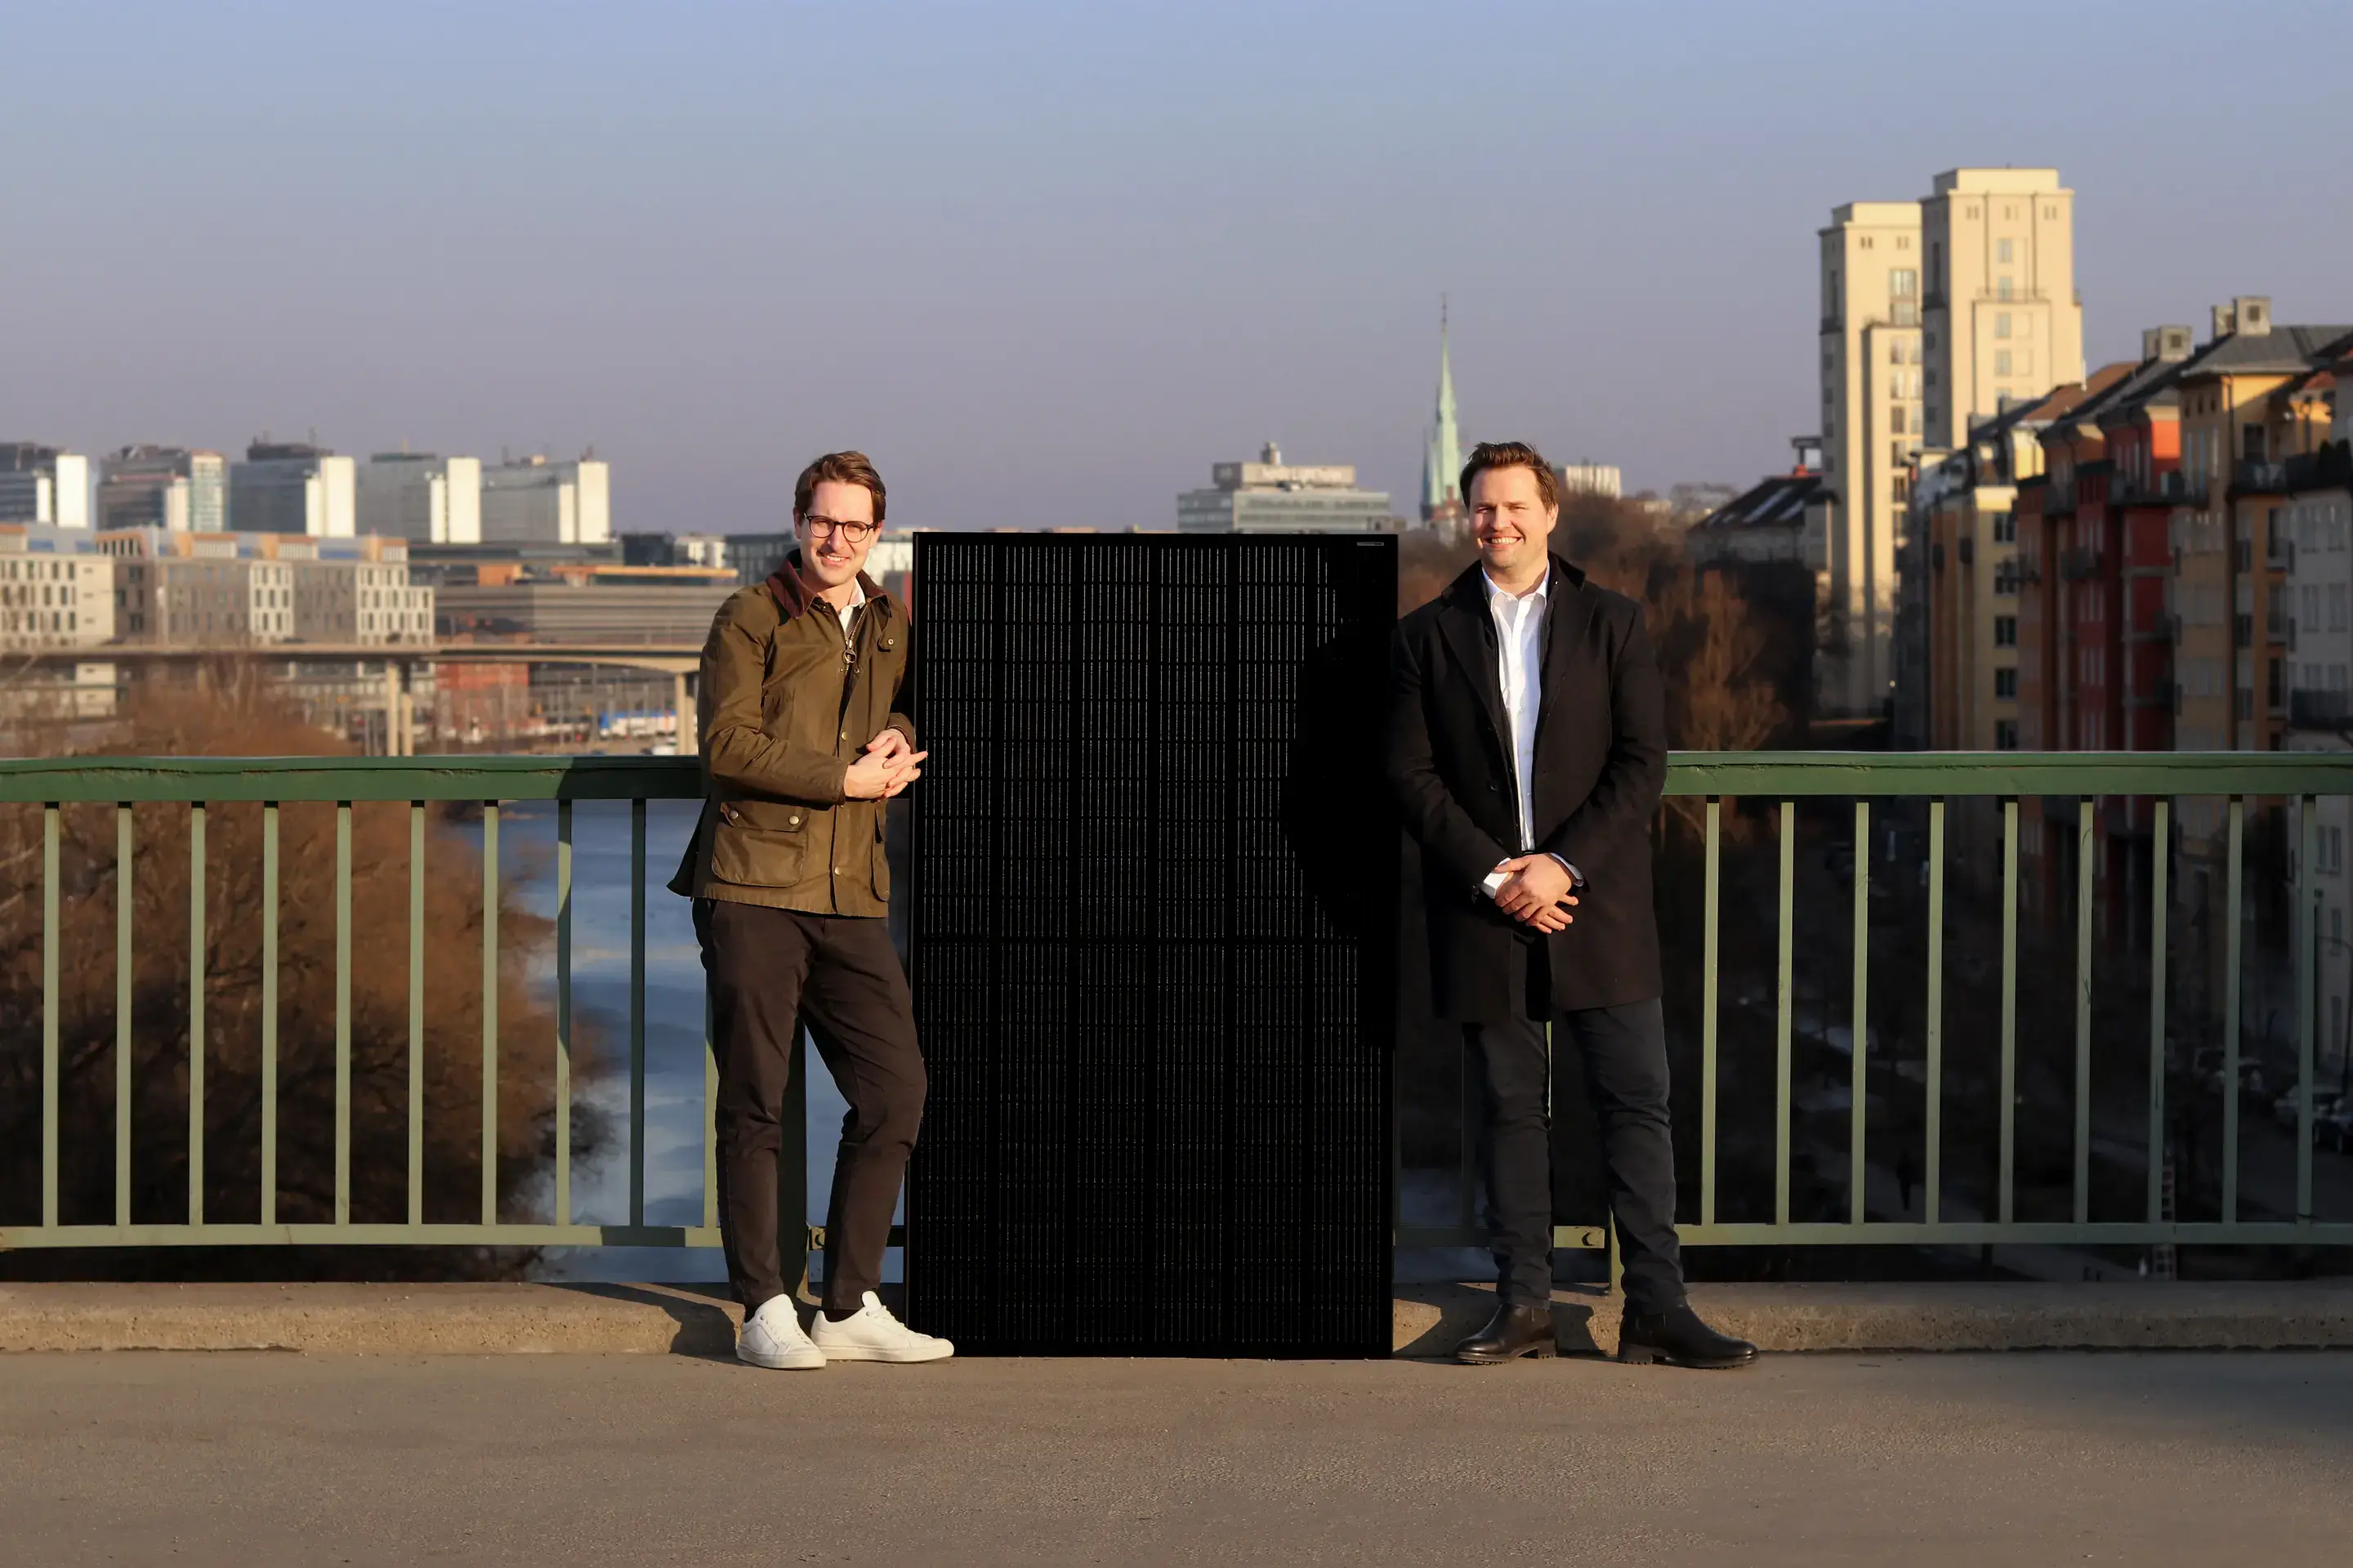 Major investment in Svea Solar to scale up solar energy in Europe